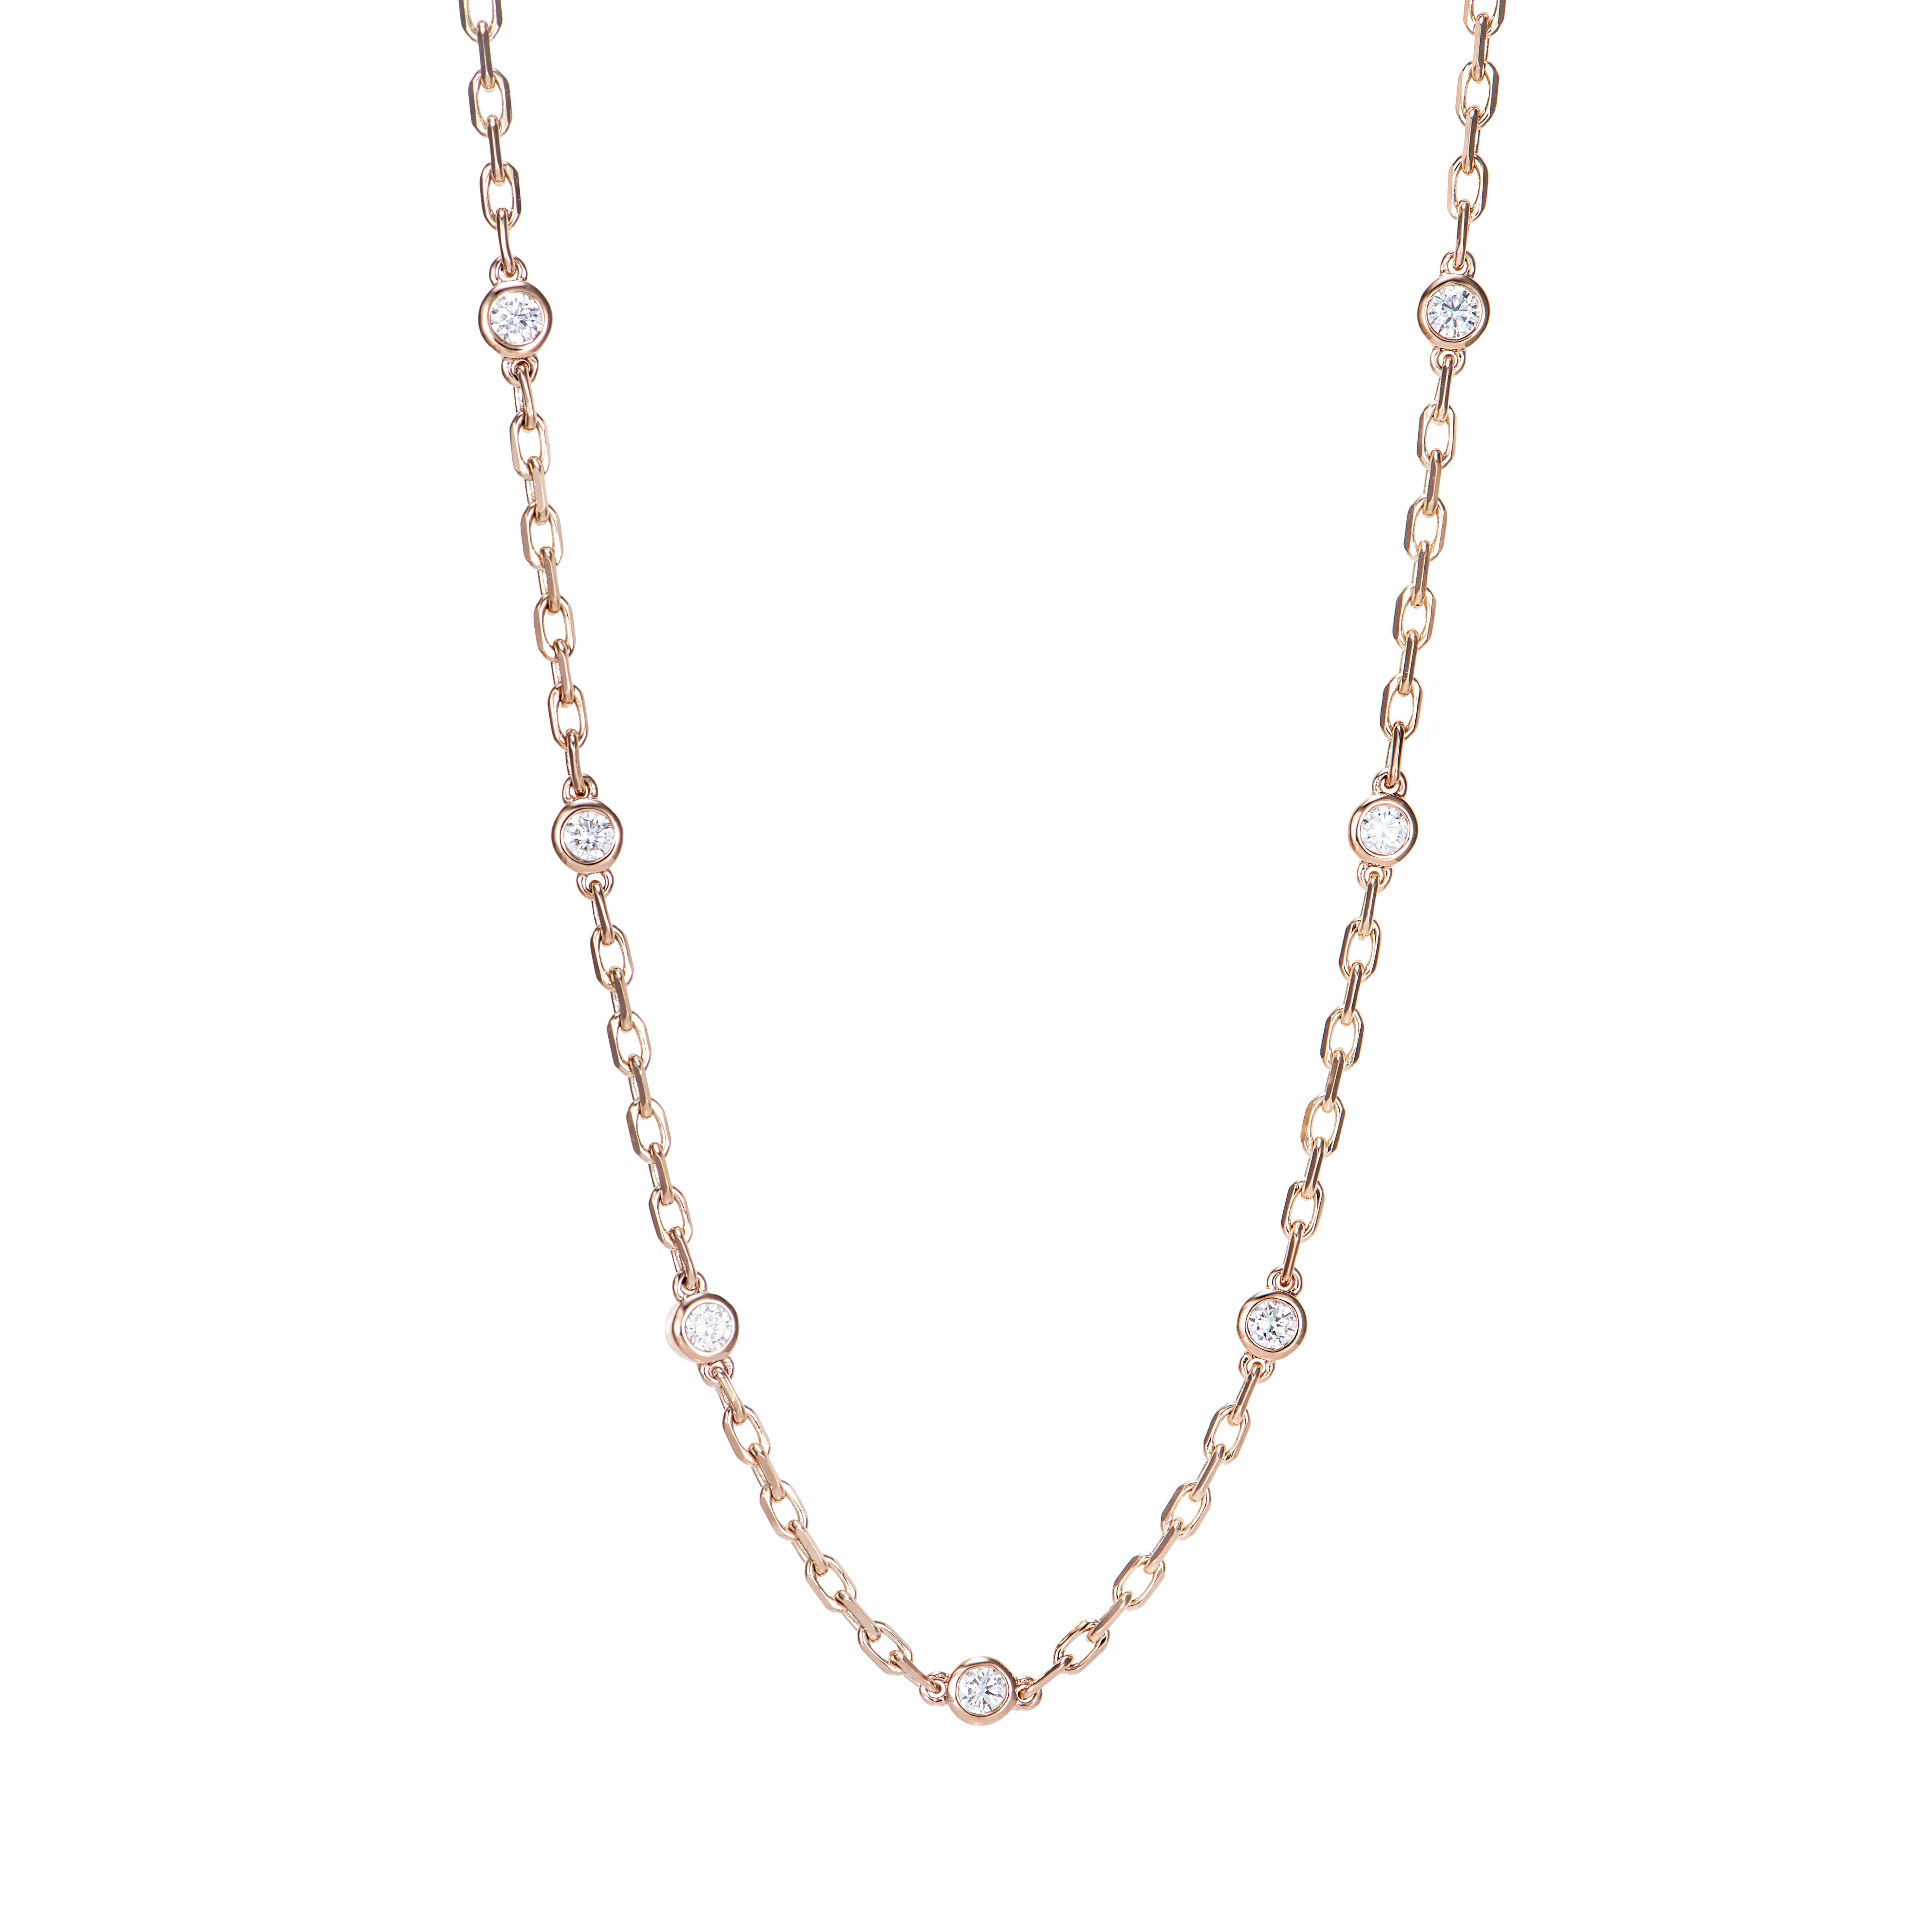 Contemporary 1.66 Carat Diamond Chain Necklace in 18 Karat Rose Gold. For Sale